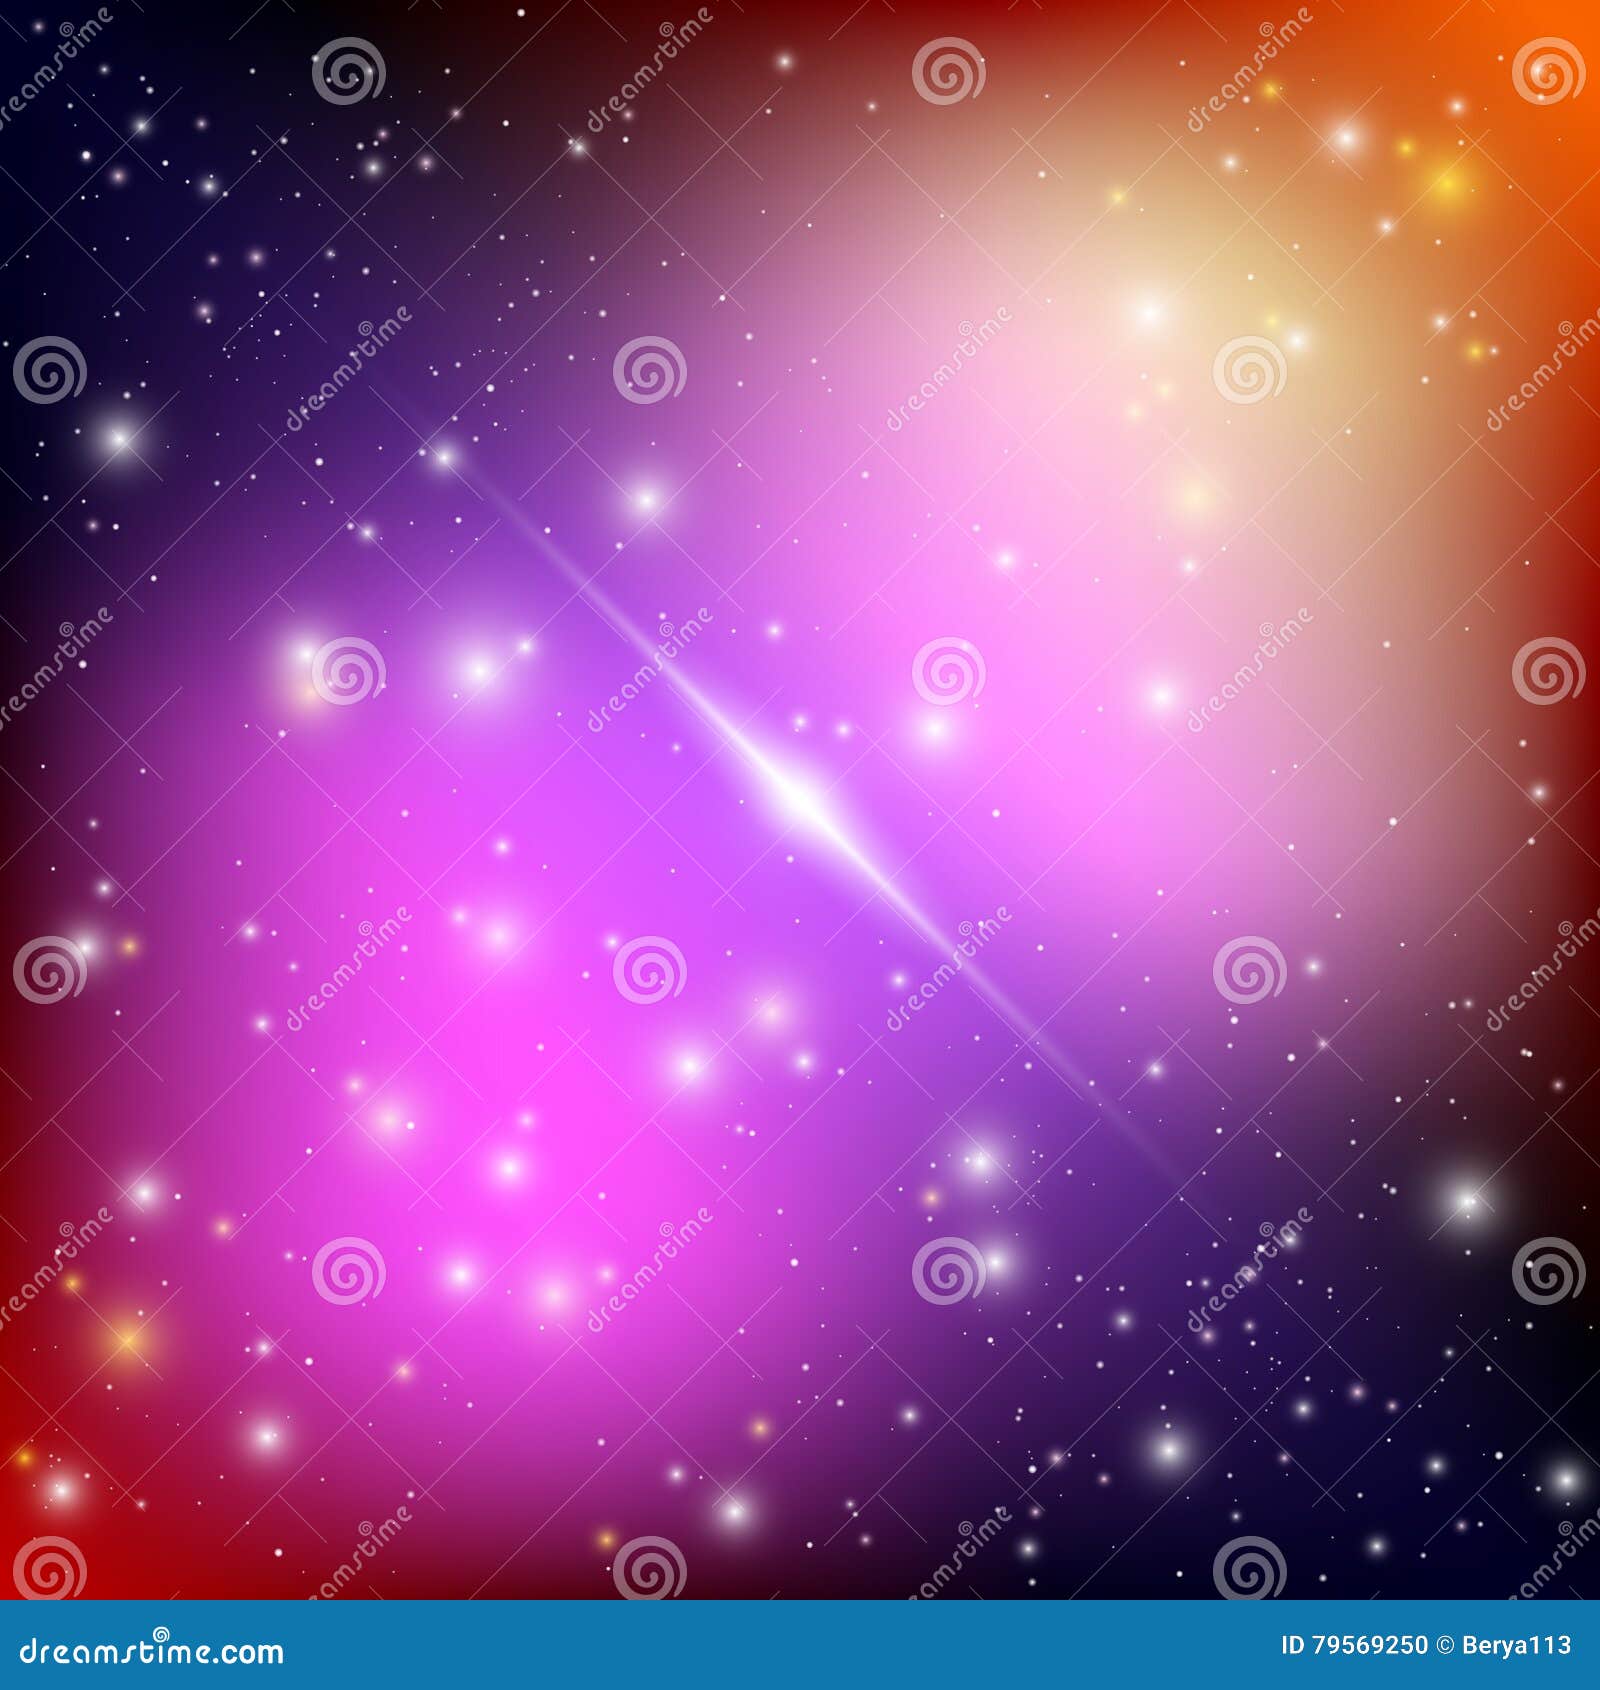 Cosmic Galaxy Background with Bright Shining Stars. Illusion UFO with ...